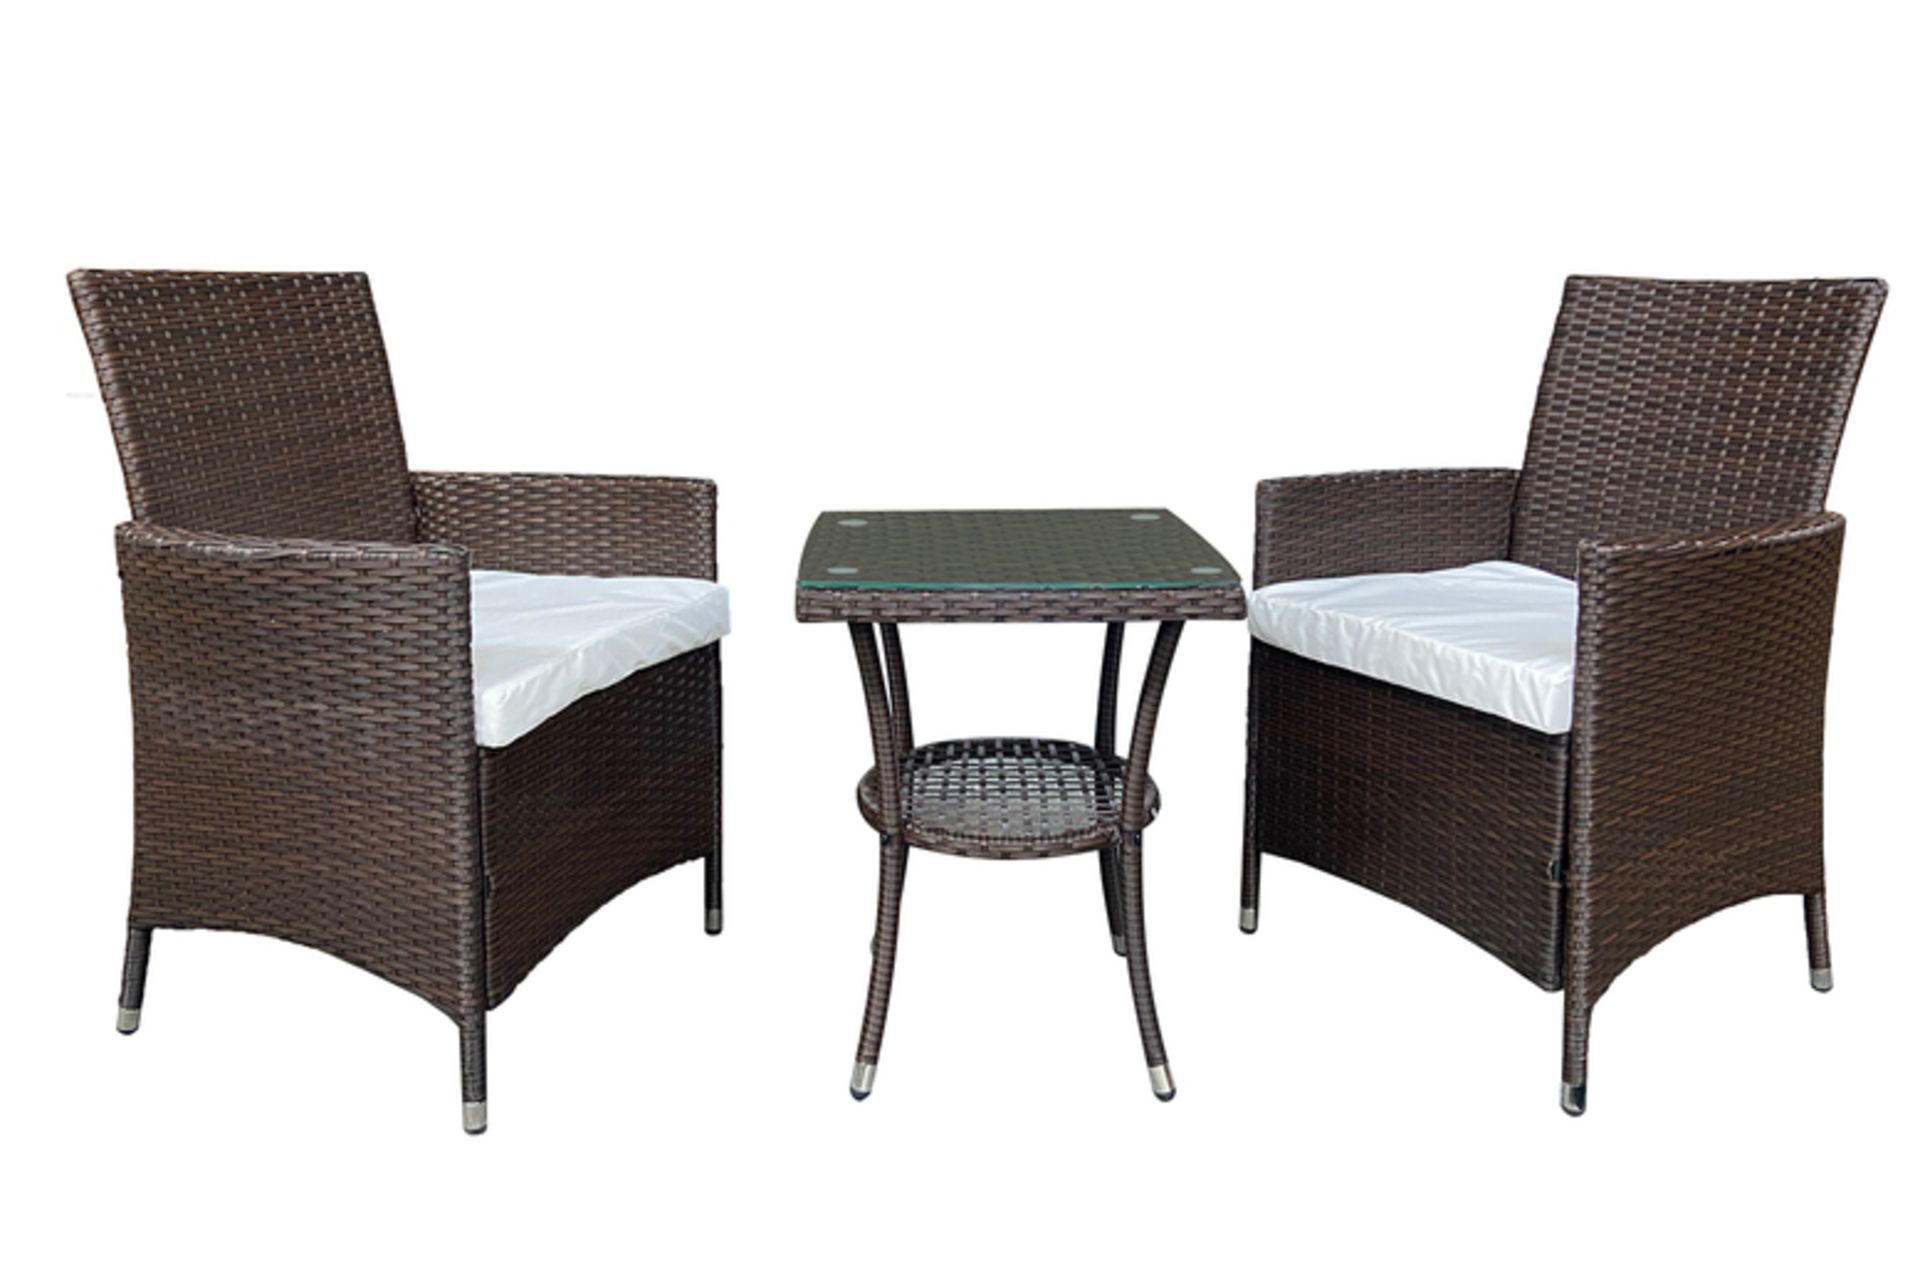 JOBLOT OF 10 X 2-SEATER RATTAN BISTRO GARDEN FURNITURE SET - ASSORTED COLOURS - Image 2 of 3